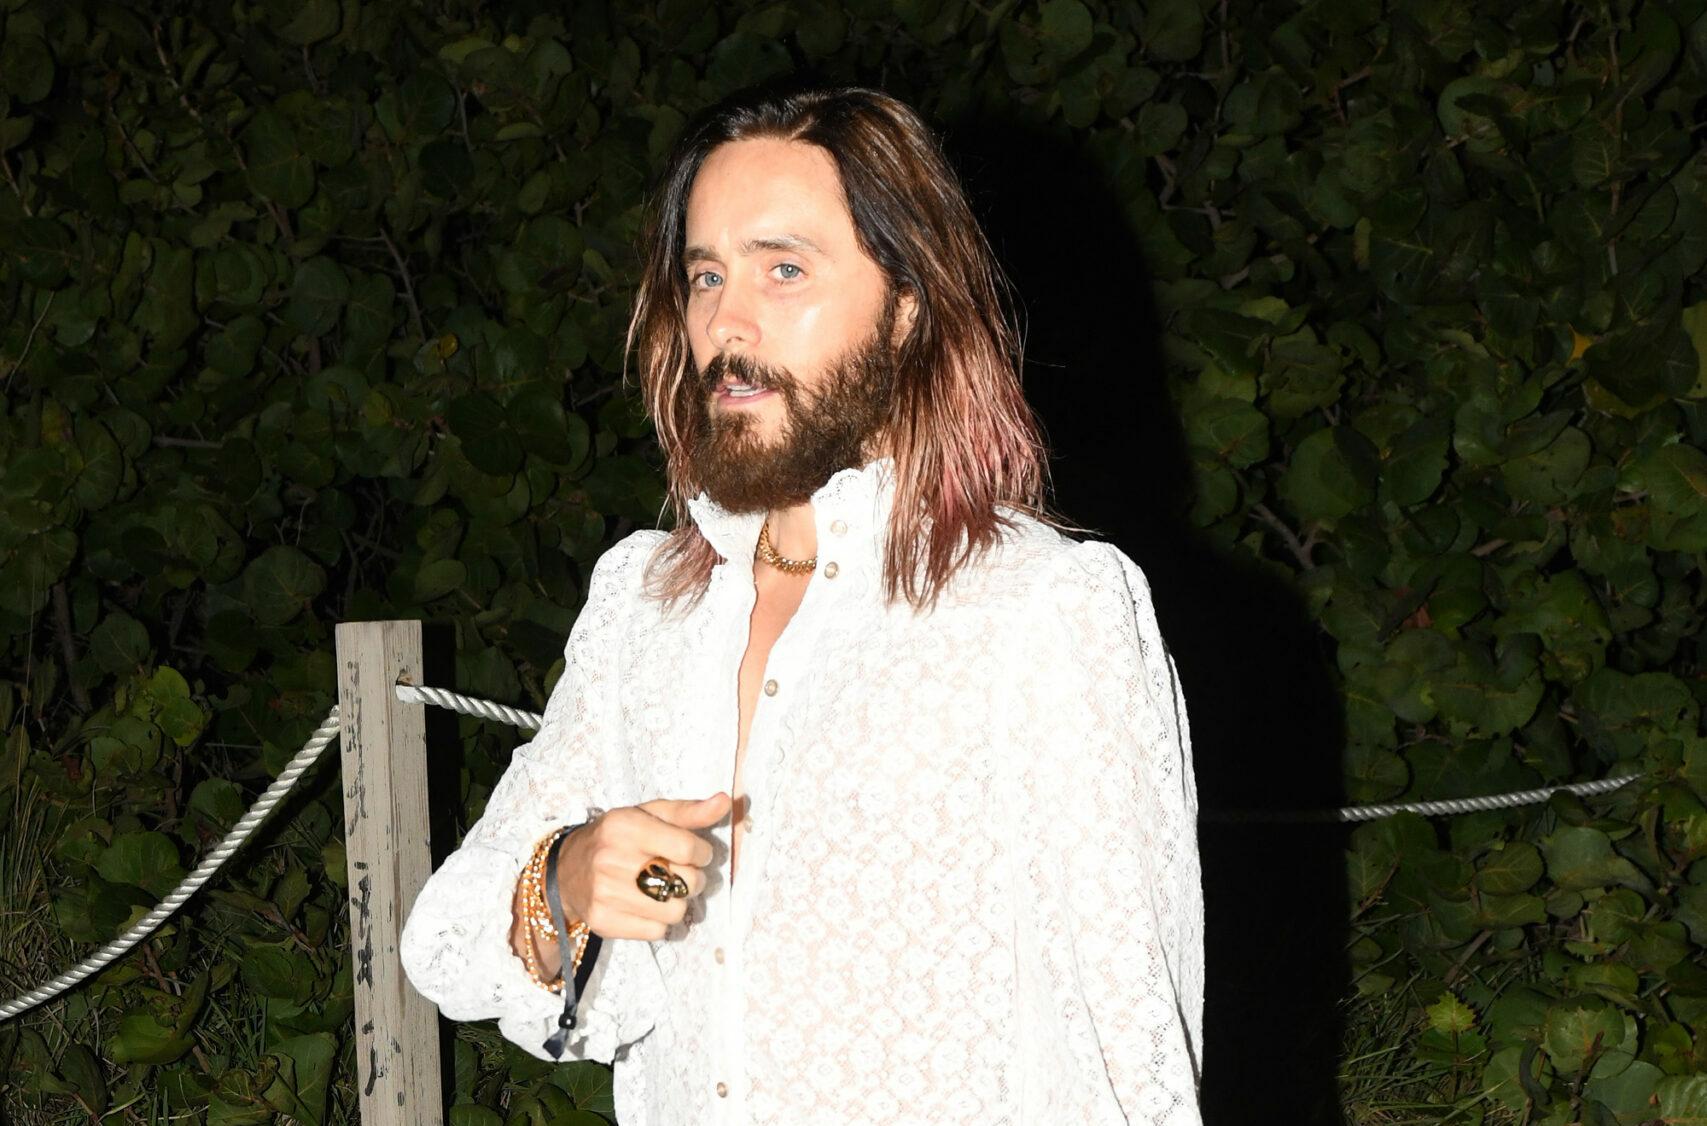 Why did Britney Spears make a reference to Jared Leto's band?